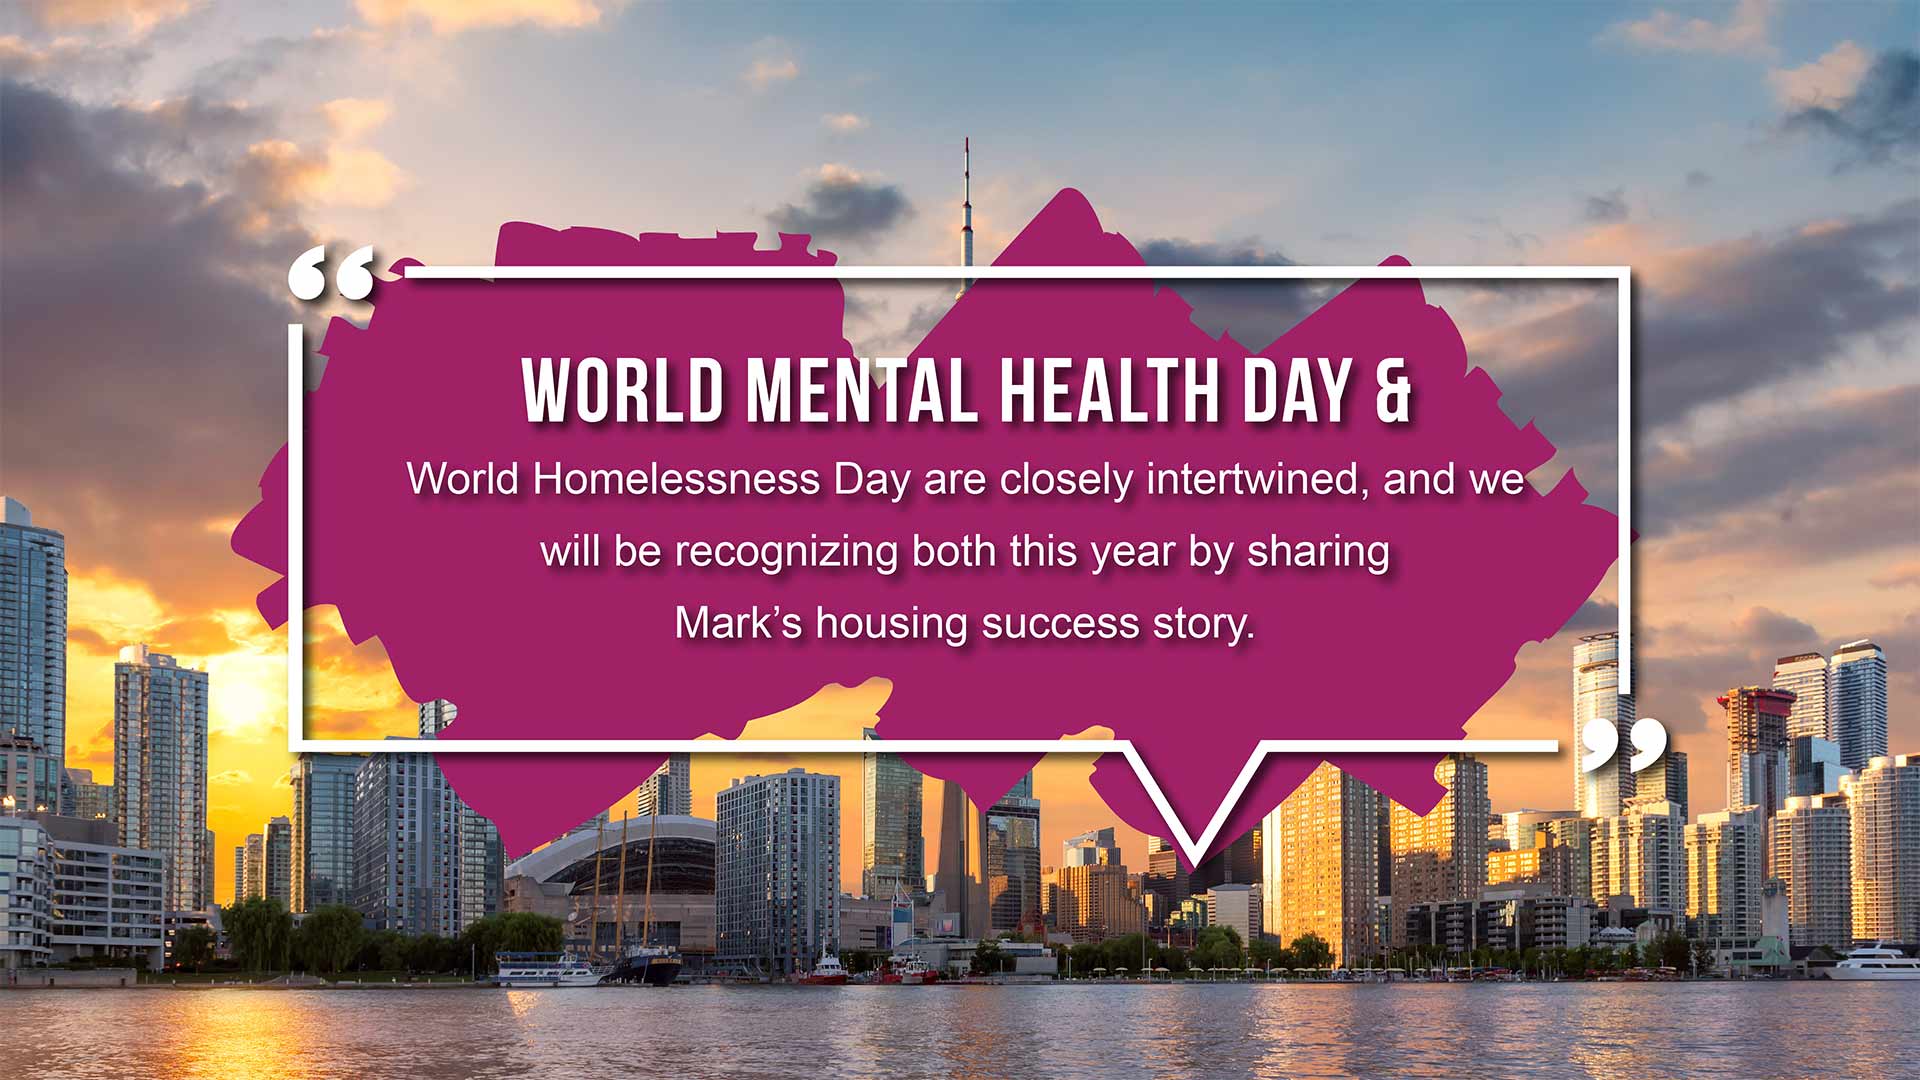 World Mental Health Day and World Homelessness Day are closely intertwined, and we will be recognizing both this year by sharing Mark’s housing success story